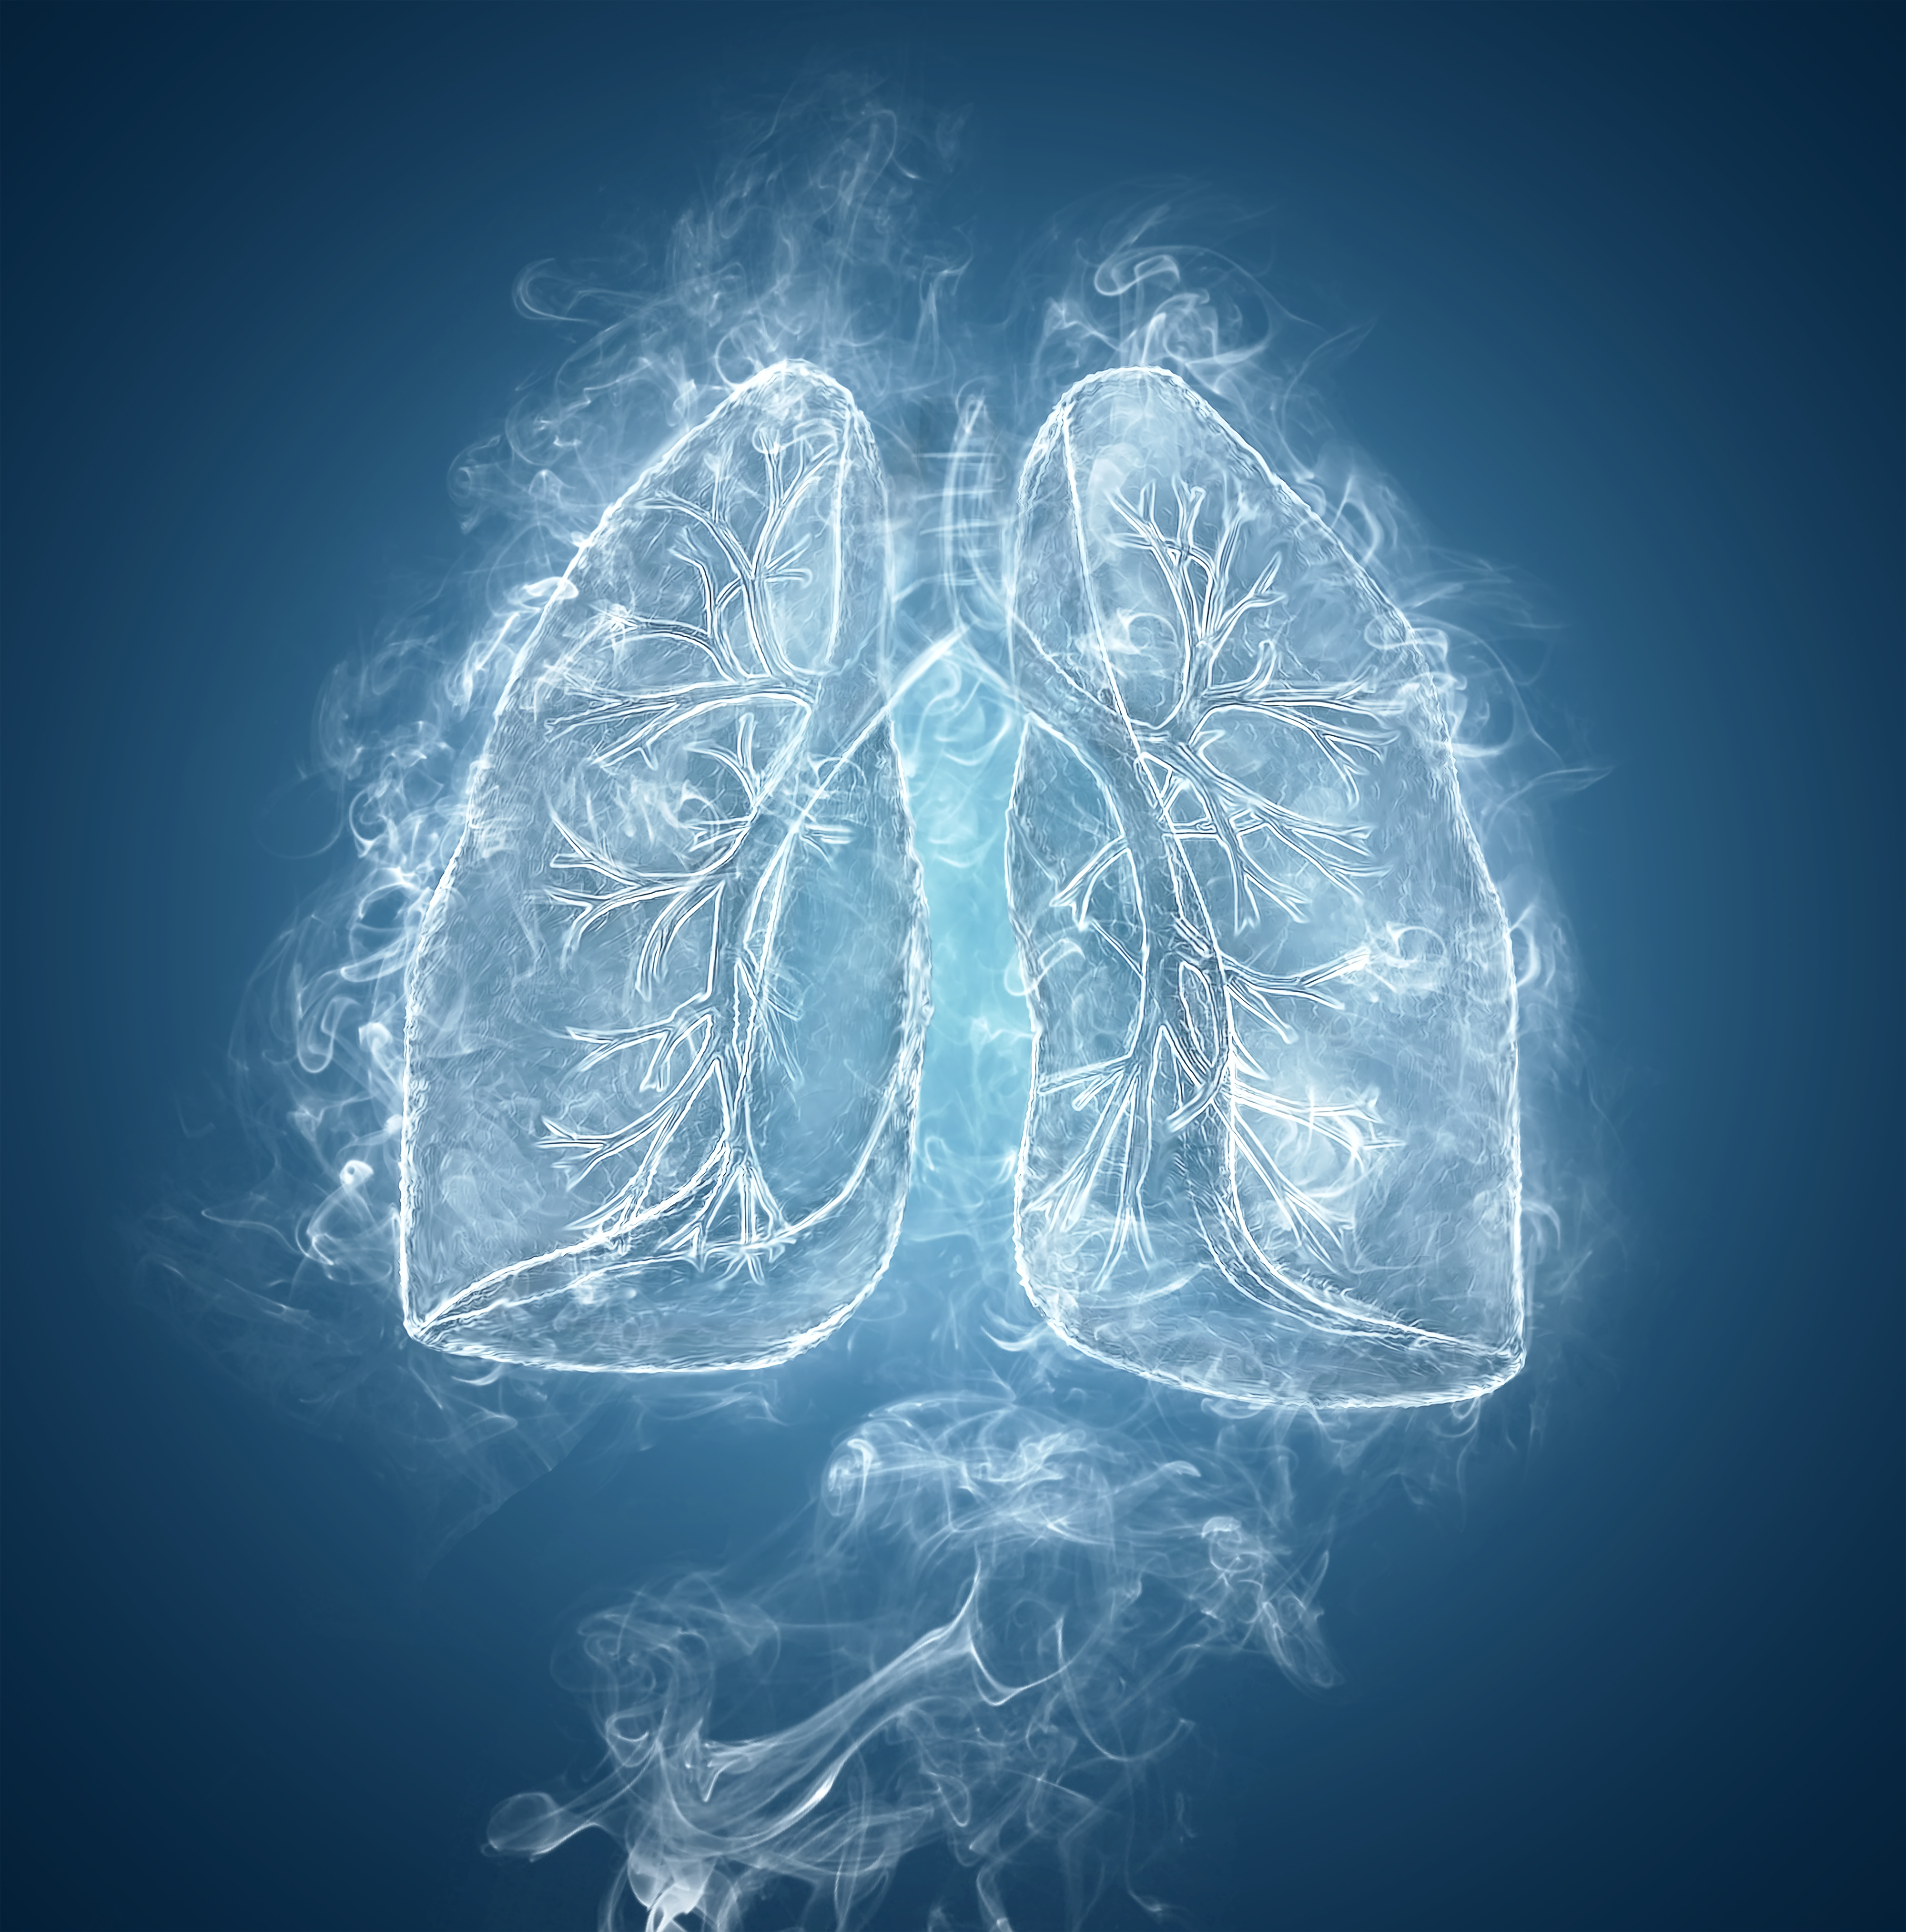 Novartis Presents Results for Compound That Improves COPD Lung Function at ATS 2015